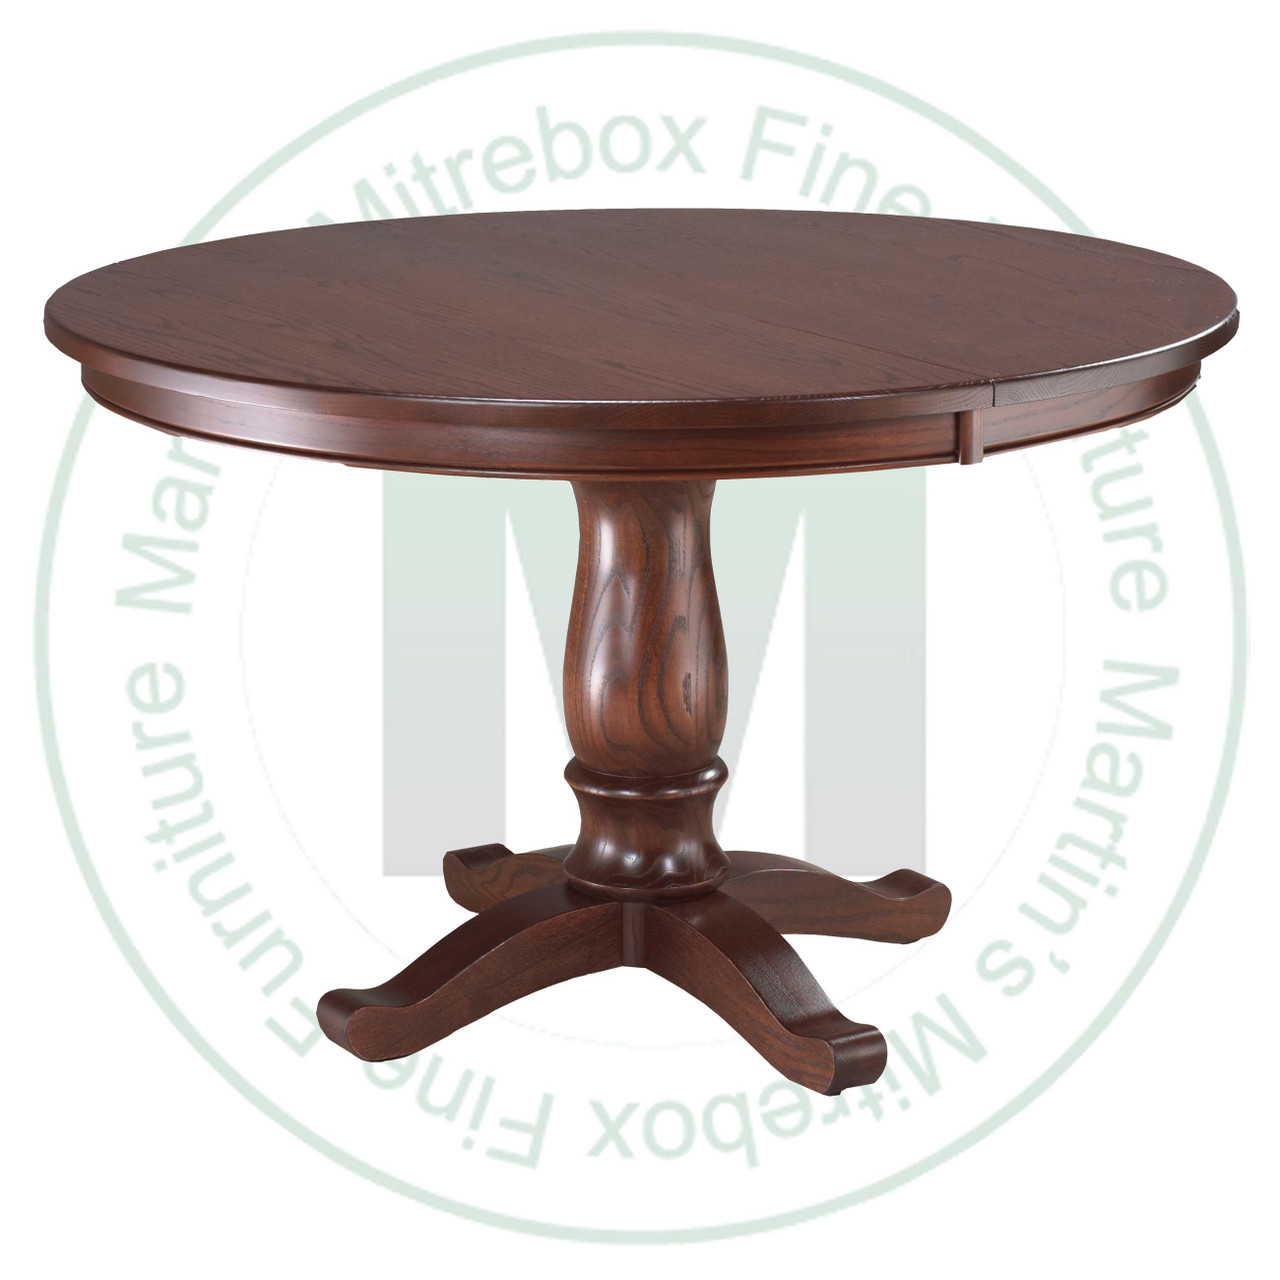 Maple Kimberly Crest Single Pedestal Table 36''D x 36''W x 30''H With 2 - 12'' Leaves Table